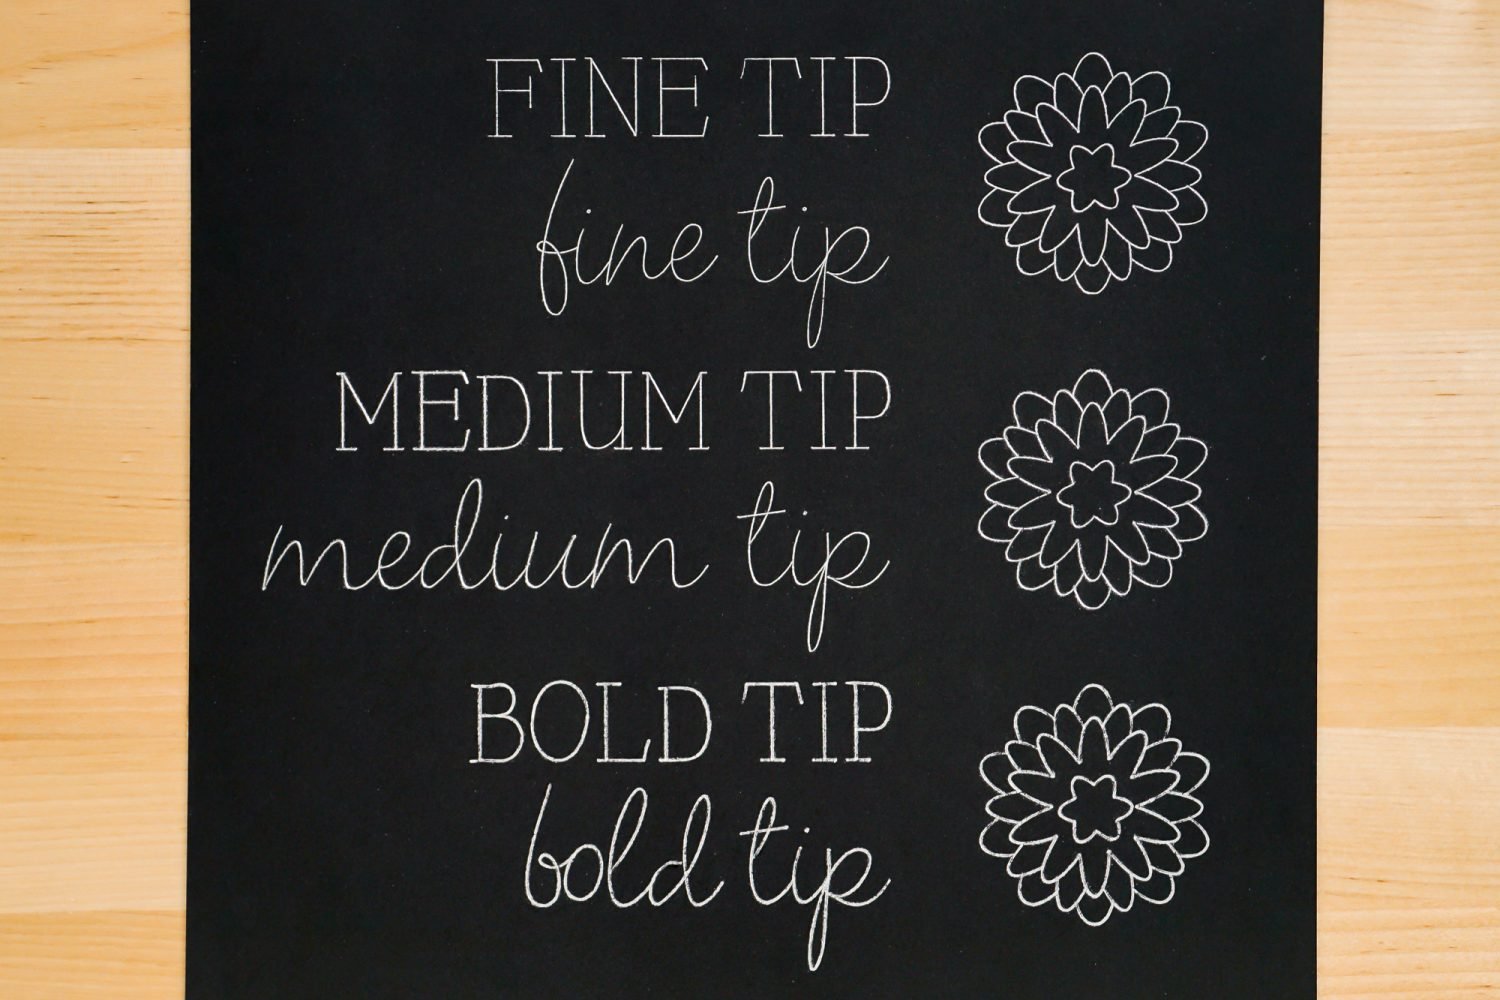 Example showing results from using three tips: fine tip, medium tip, and bold tip. Silver foil writing on black paper.